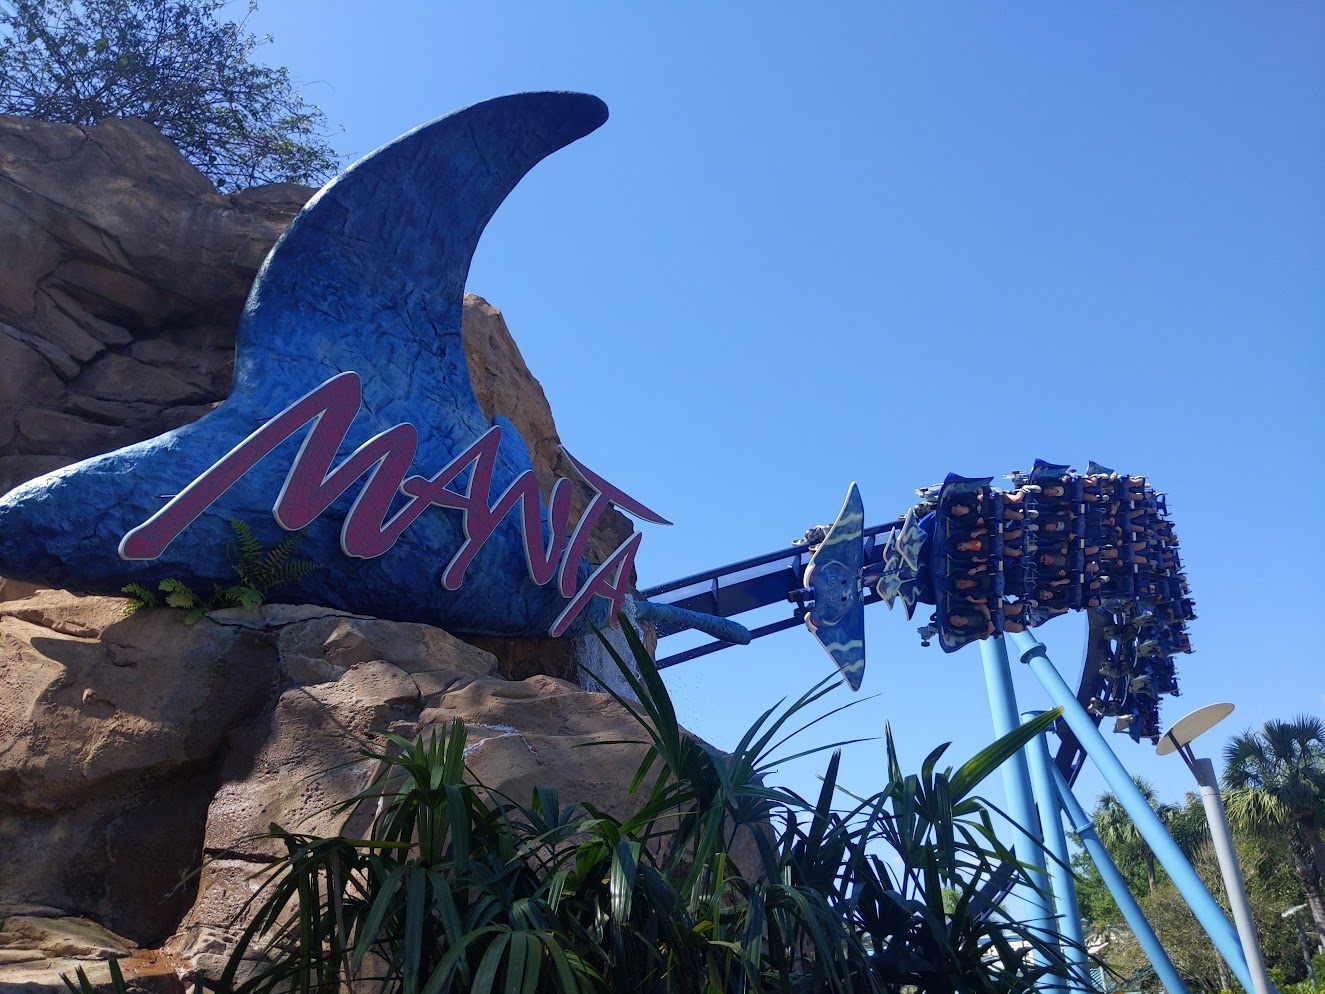 Manta's sign, a coaster train is coming around a bend in line with the sign.